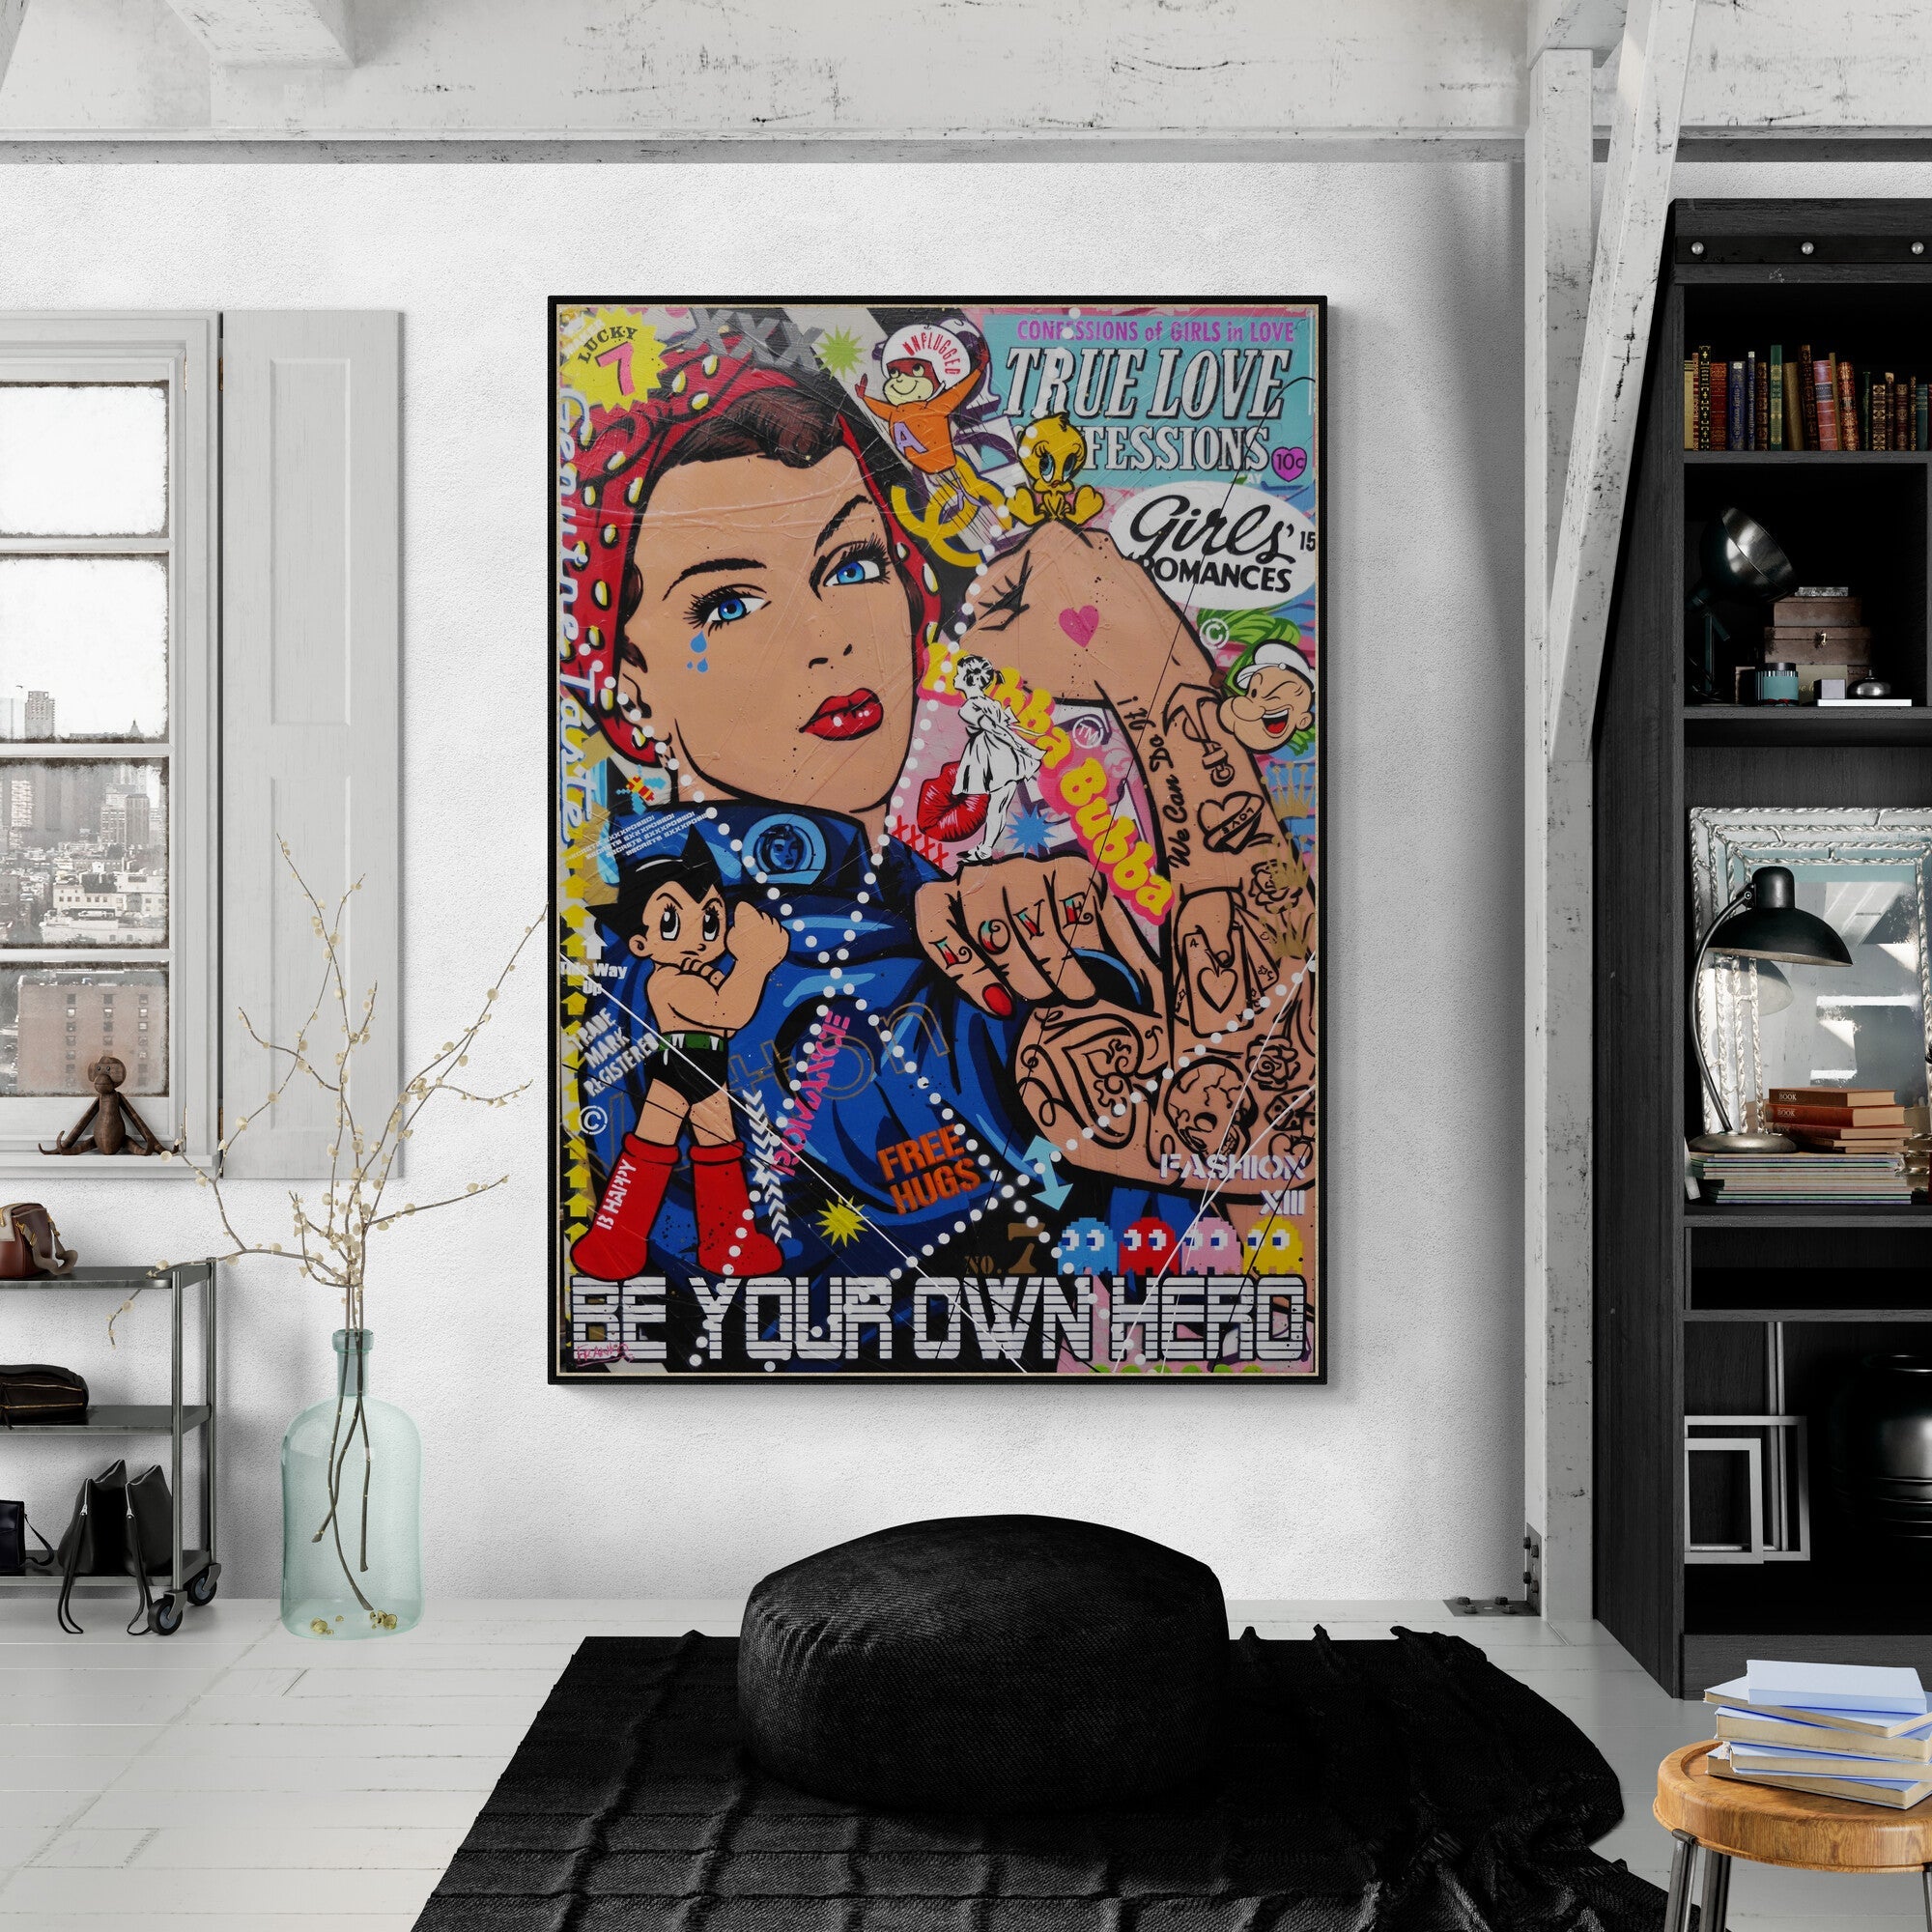 Be your own Rosie 140cm x 100cm Rosie The Riveter Textured Urban Pop Art Painting (SOLD)